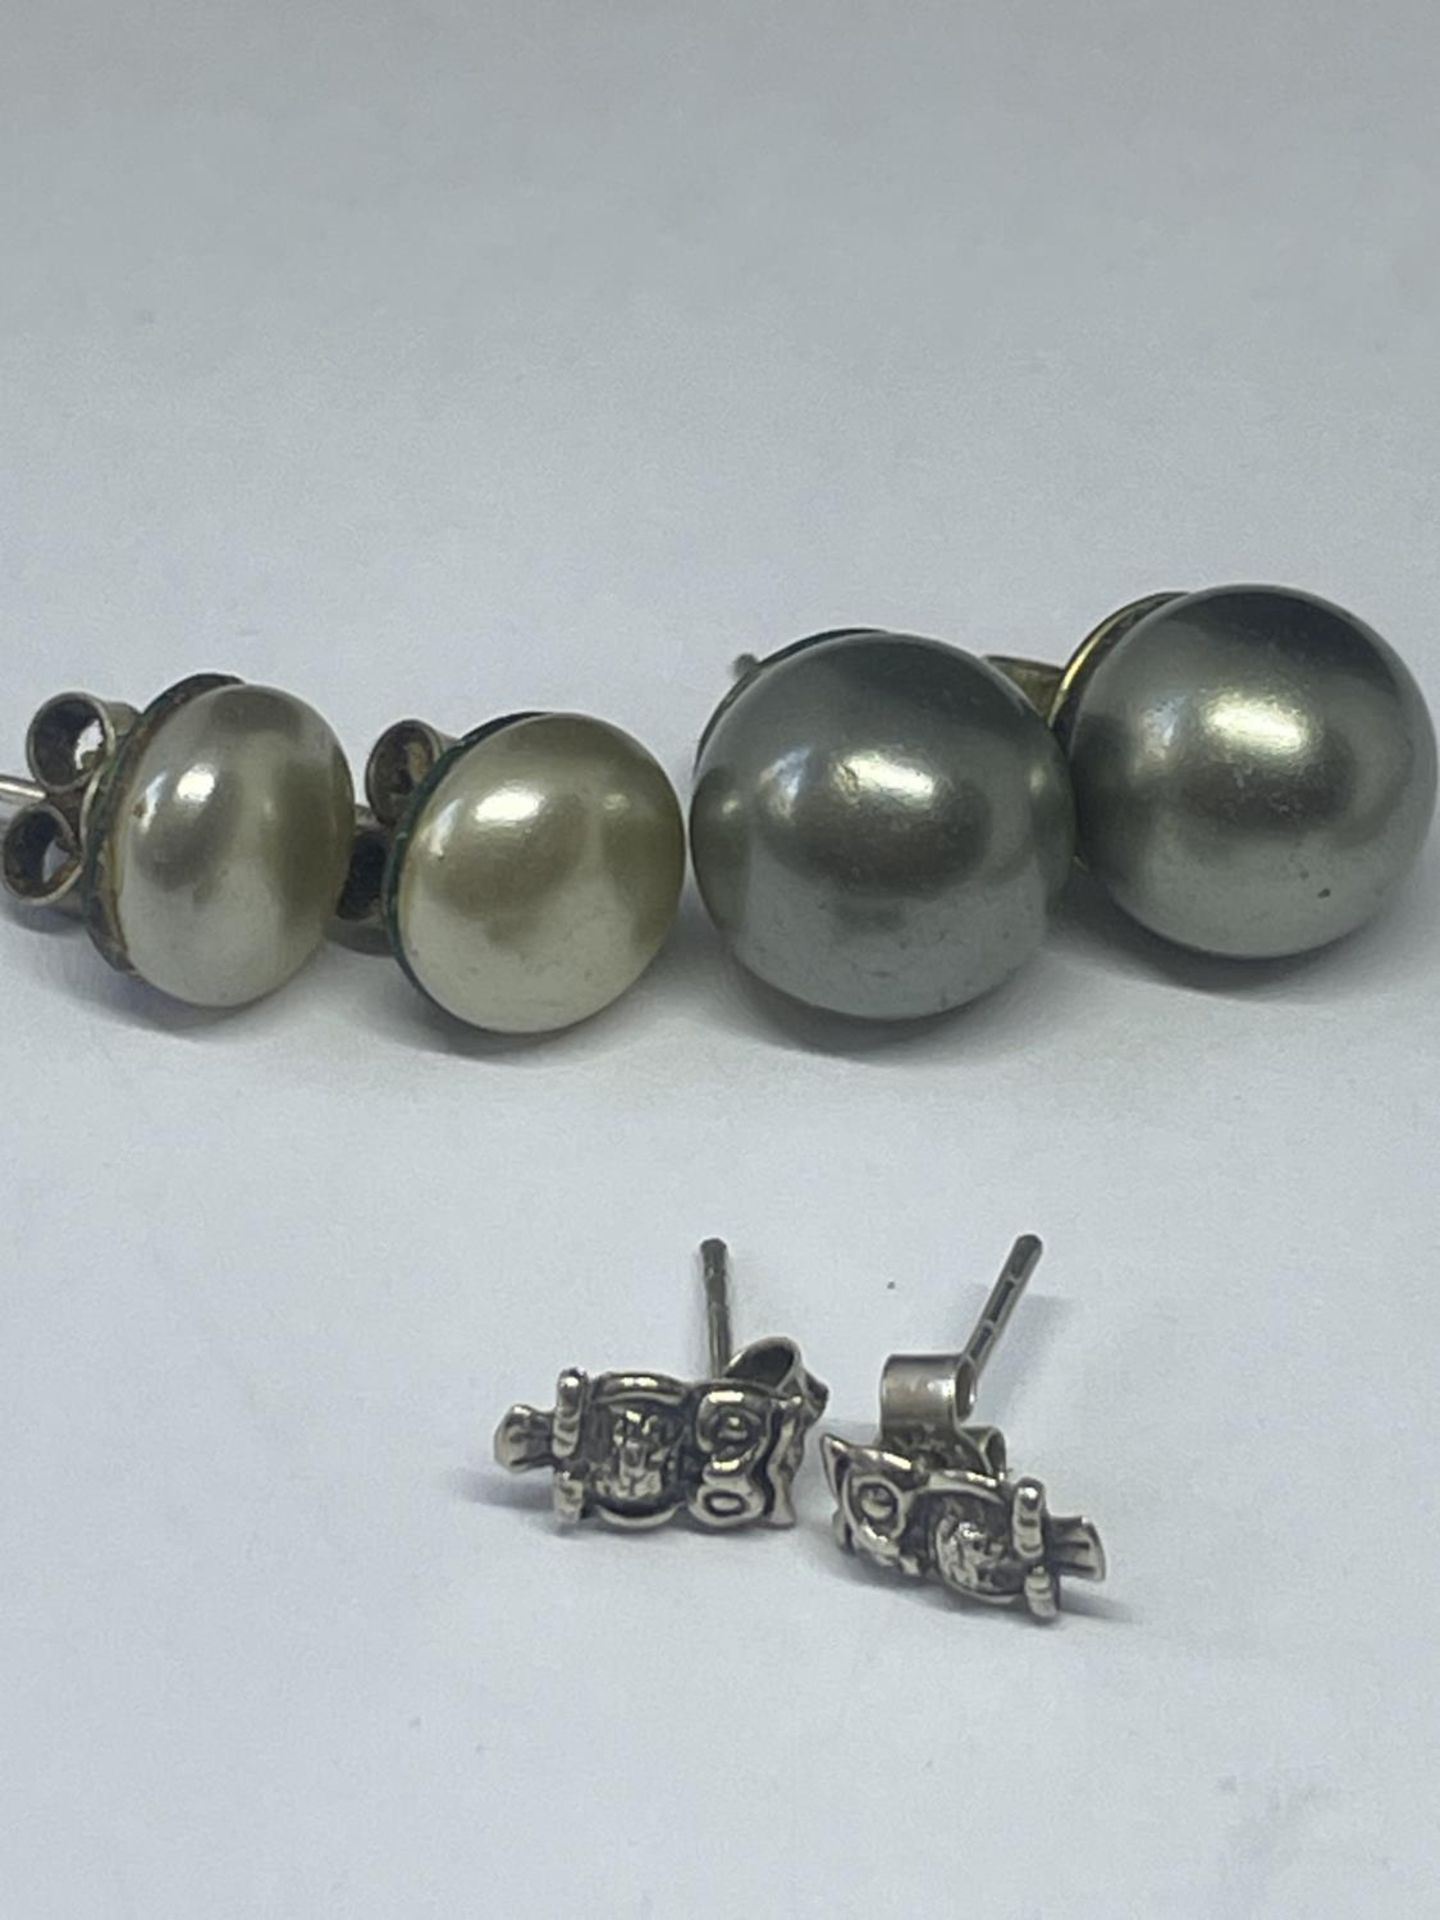 VARIOUS ITEMS TO INCLUDE FIVE PAIRS OF EARRINGS, A RELIGIOUS PENDANT AND A PAIR OF CUFFLINKS - Image 2 of 4